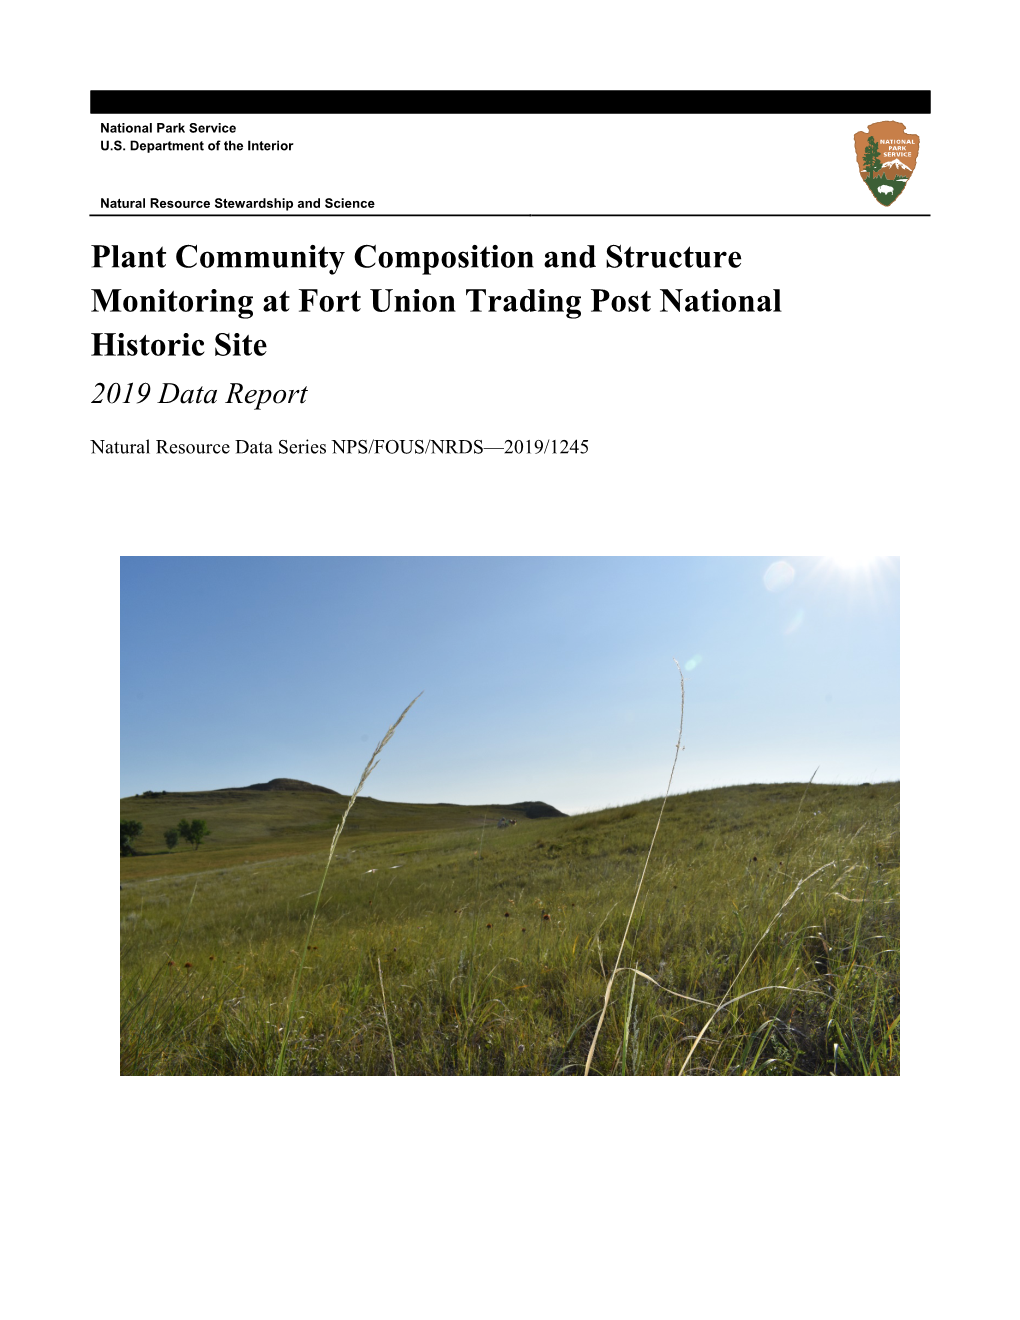 Plant Community Composition and Structure Monitoring for Fort Union Trading Post National Historic Site: 2010 – 2016 Summary Report